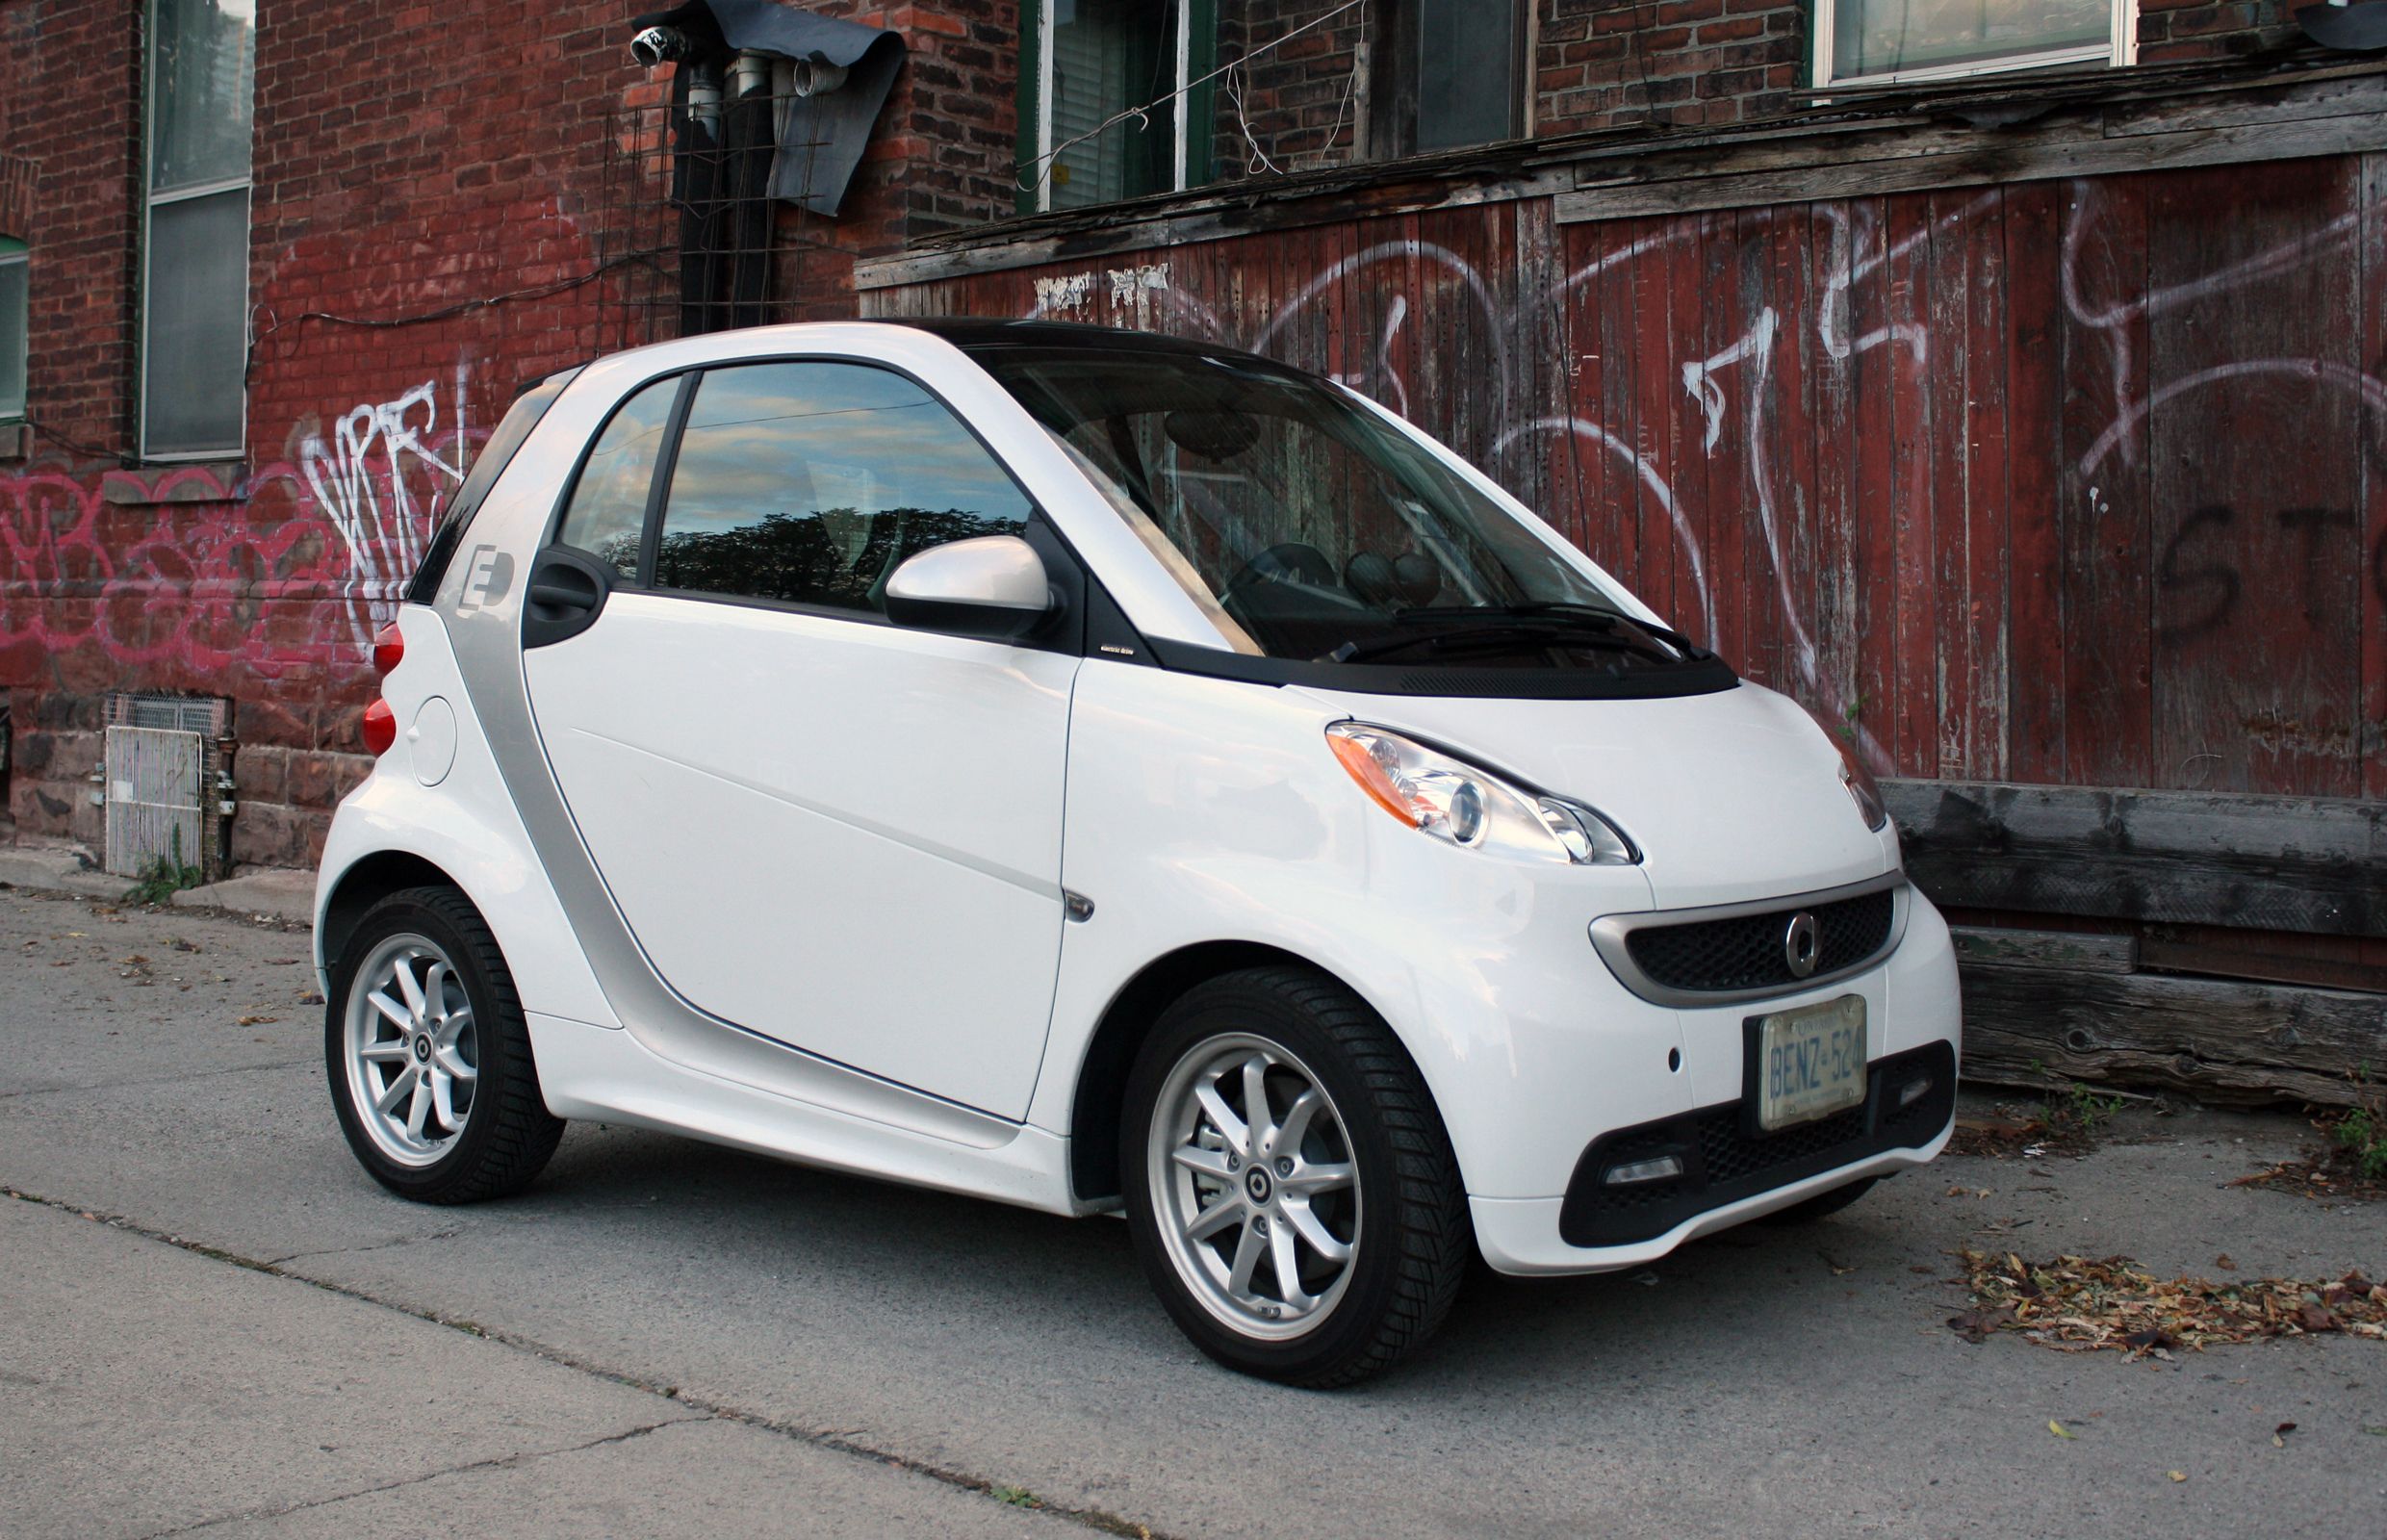 Car Review: 2014 Smart fortwo Electric Drive (with video)